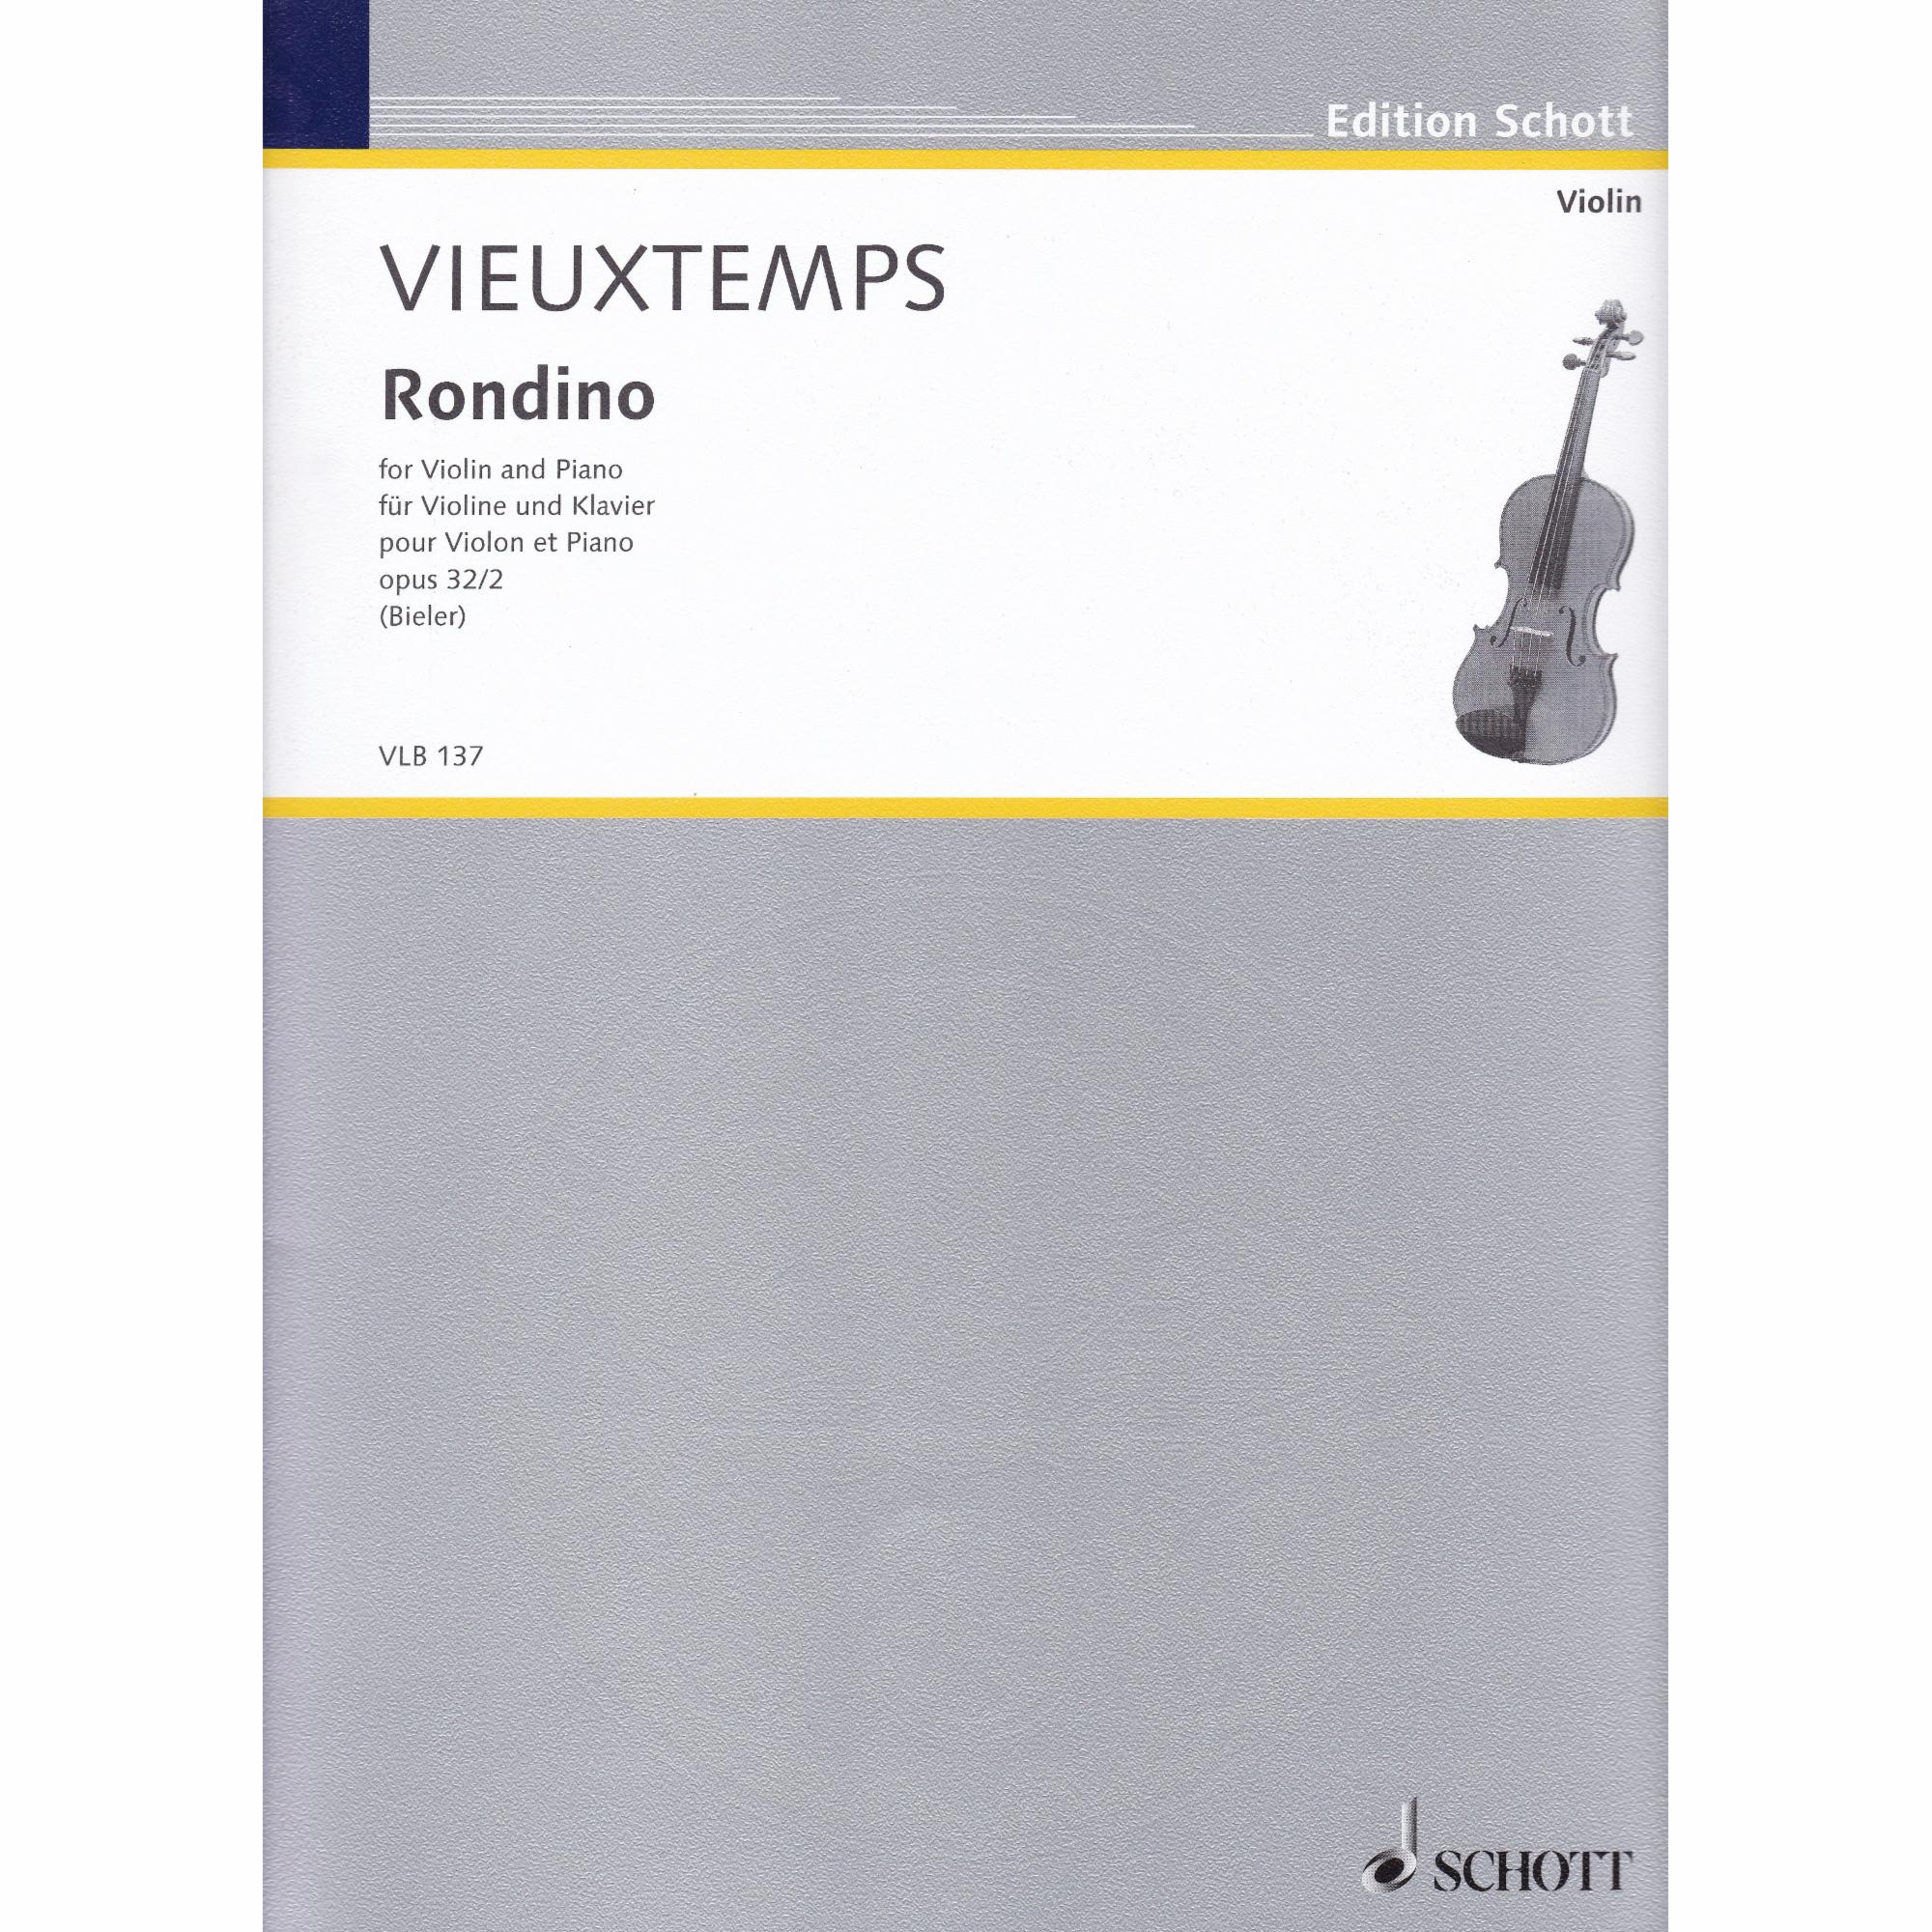 Rondino for Violin and Piano, Op. 32, No. 2